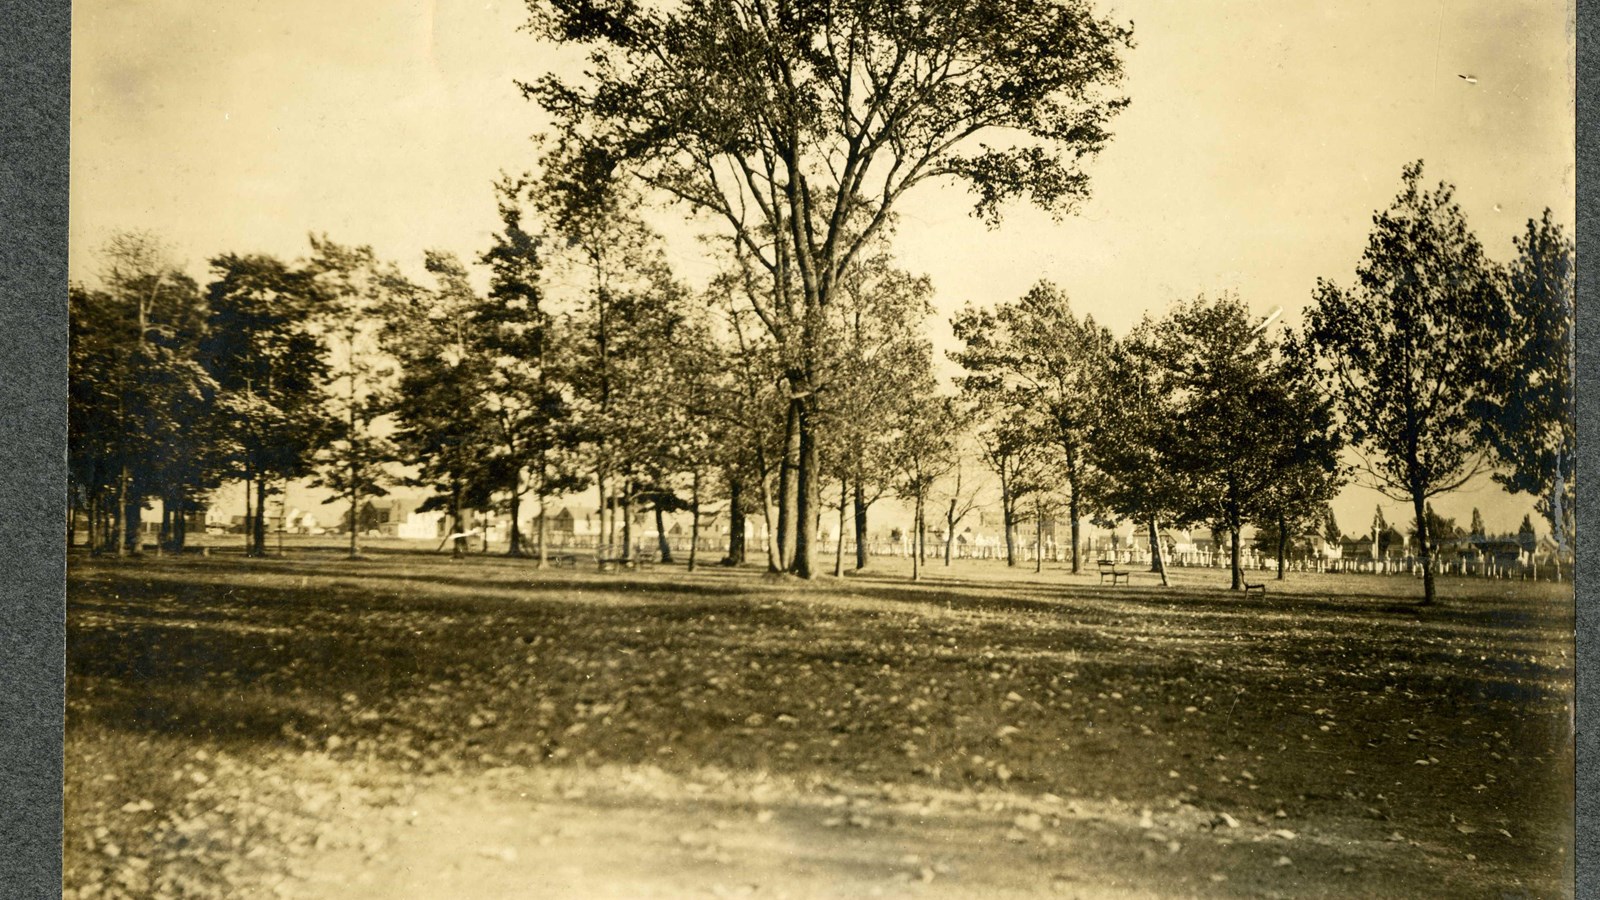 Black and white of flat grassy area with trees spread out, benches spread out